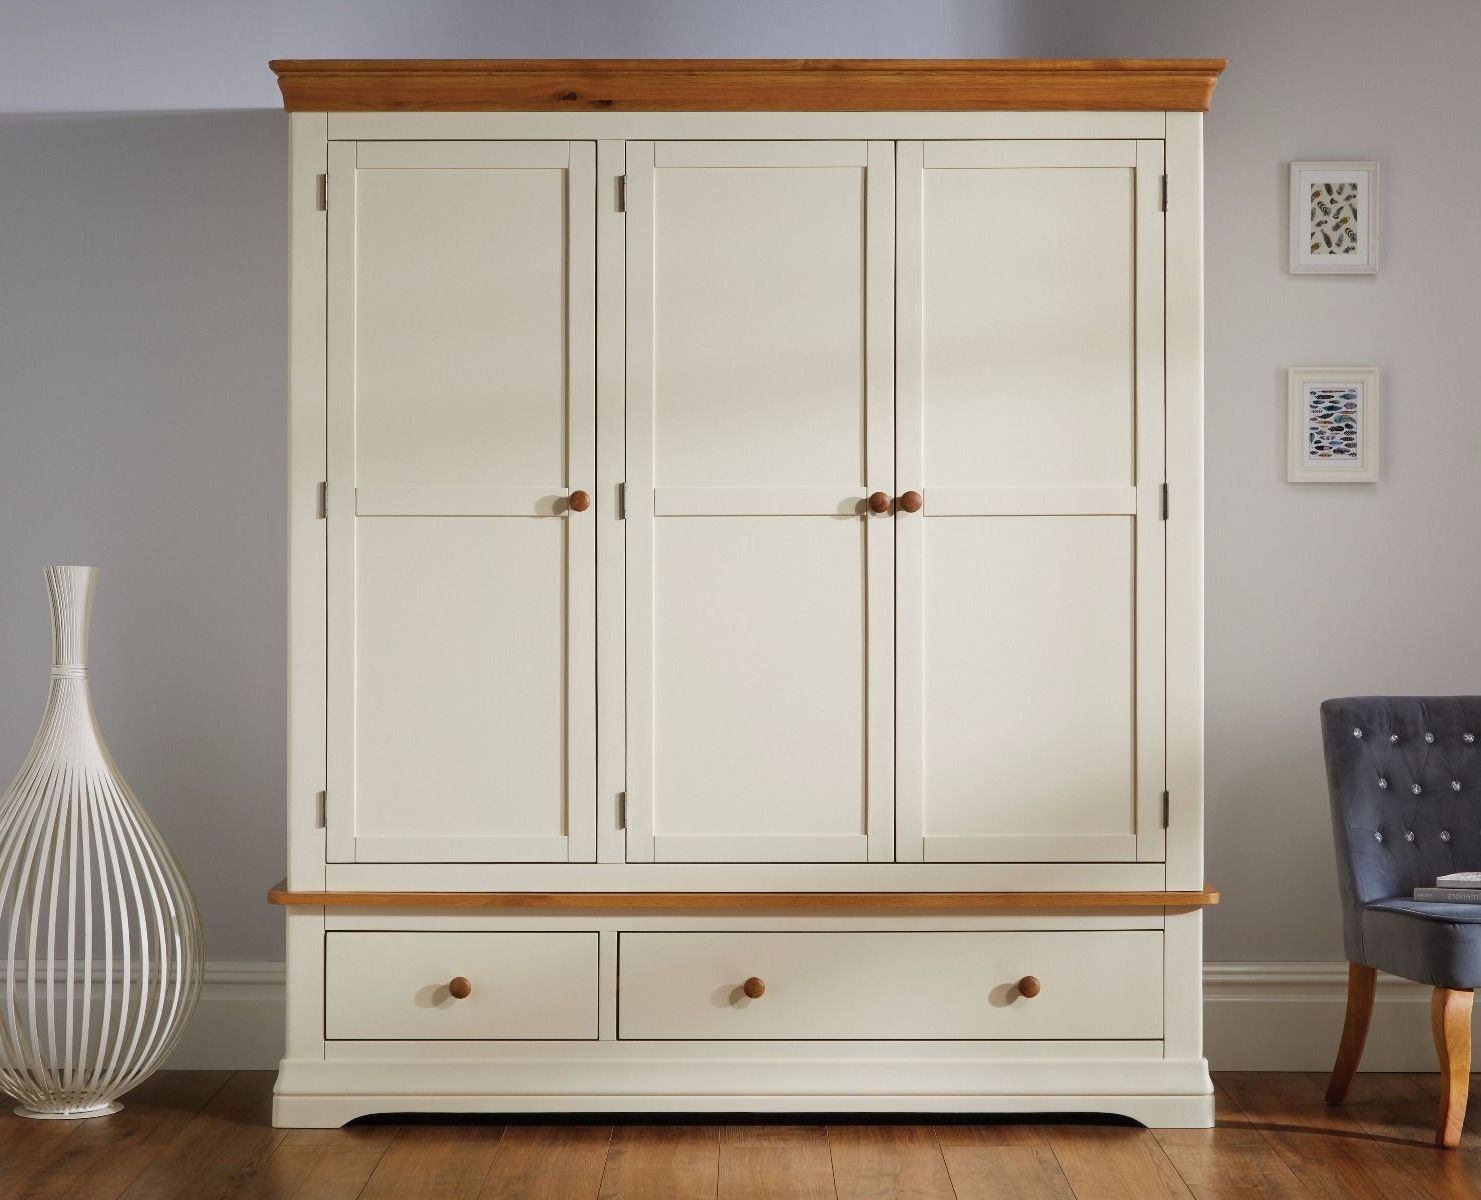 Farmhouse Cream Painted Triple Oak Wardrobe – Free Delivery | Top Furniture With Regard To Cream Triple Wardrobes (View 5 of 20)